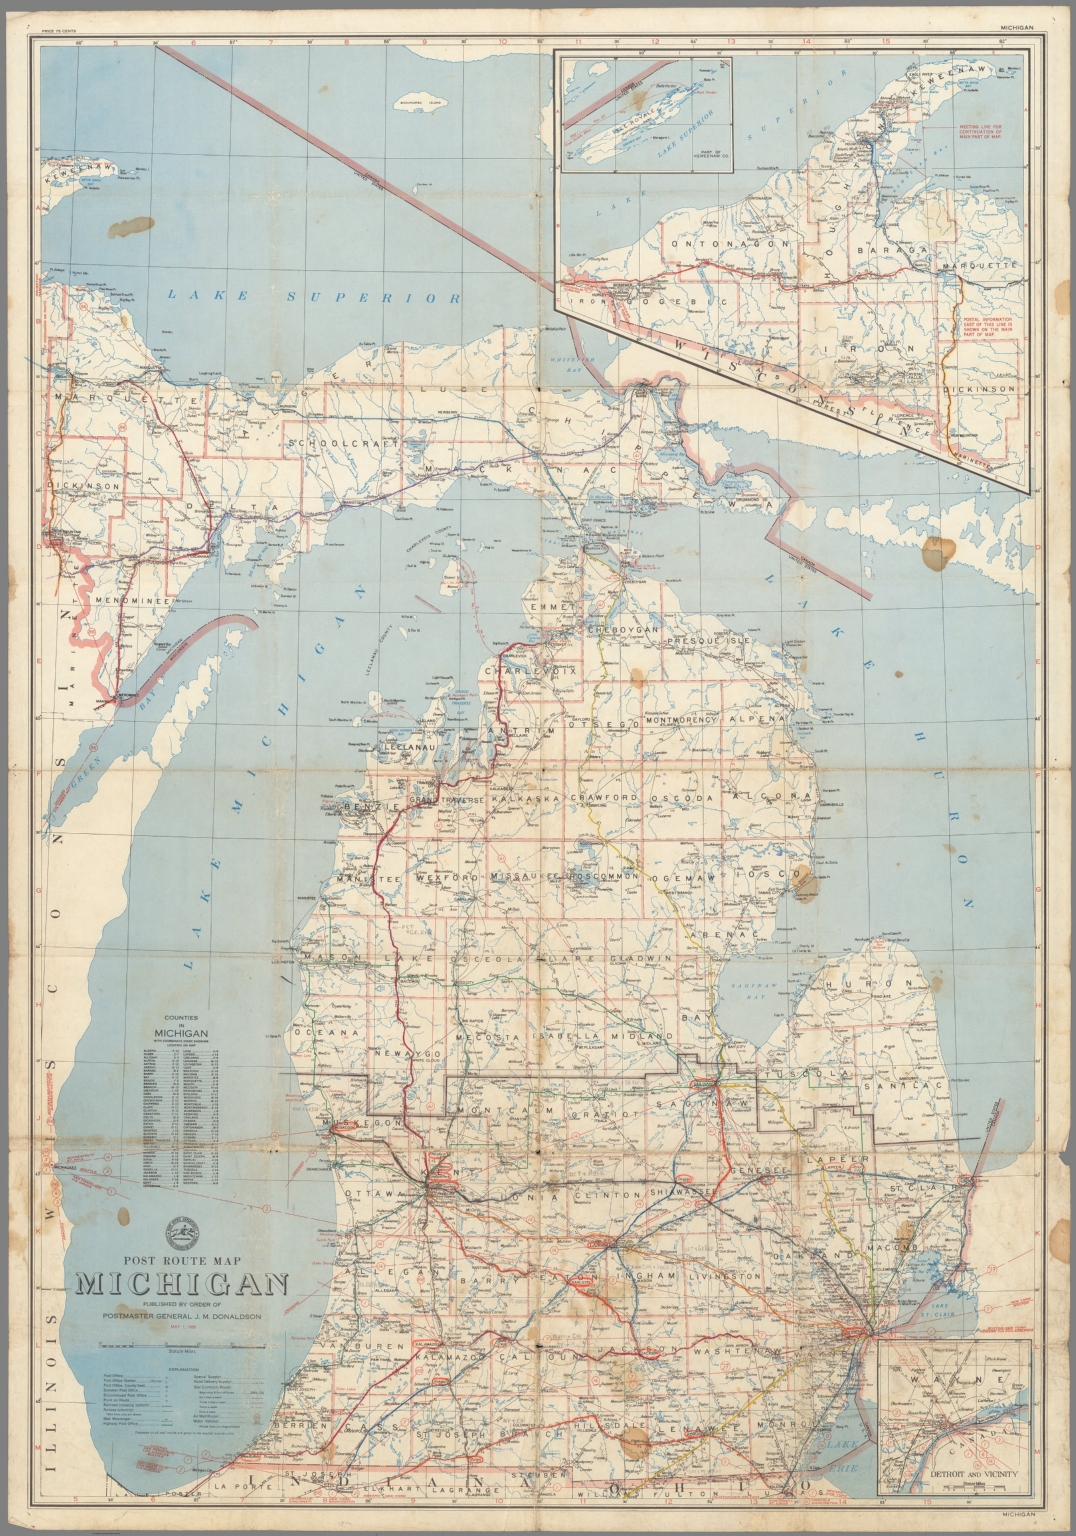 Post Route Map of the State of Michigan Showing Post Offices ... May 1 ...